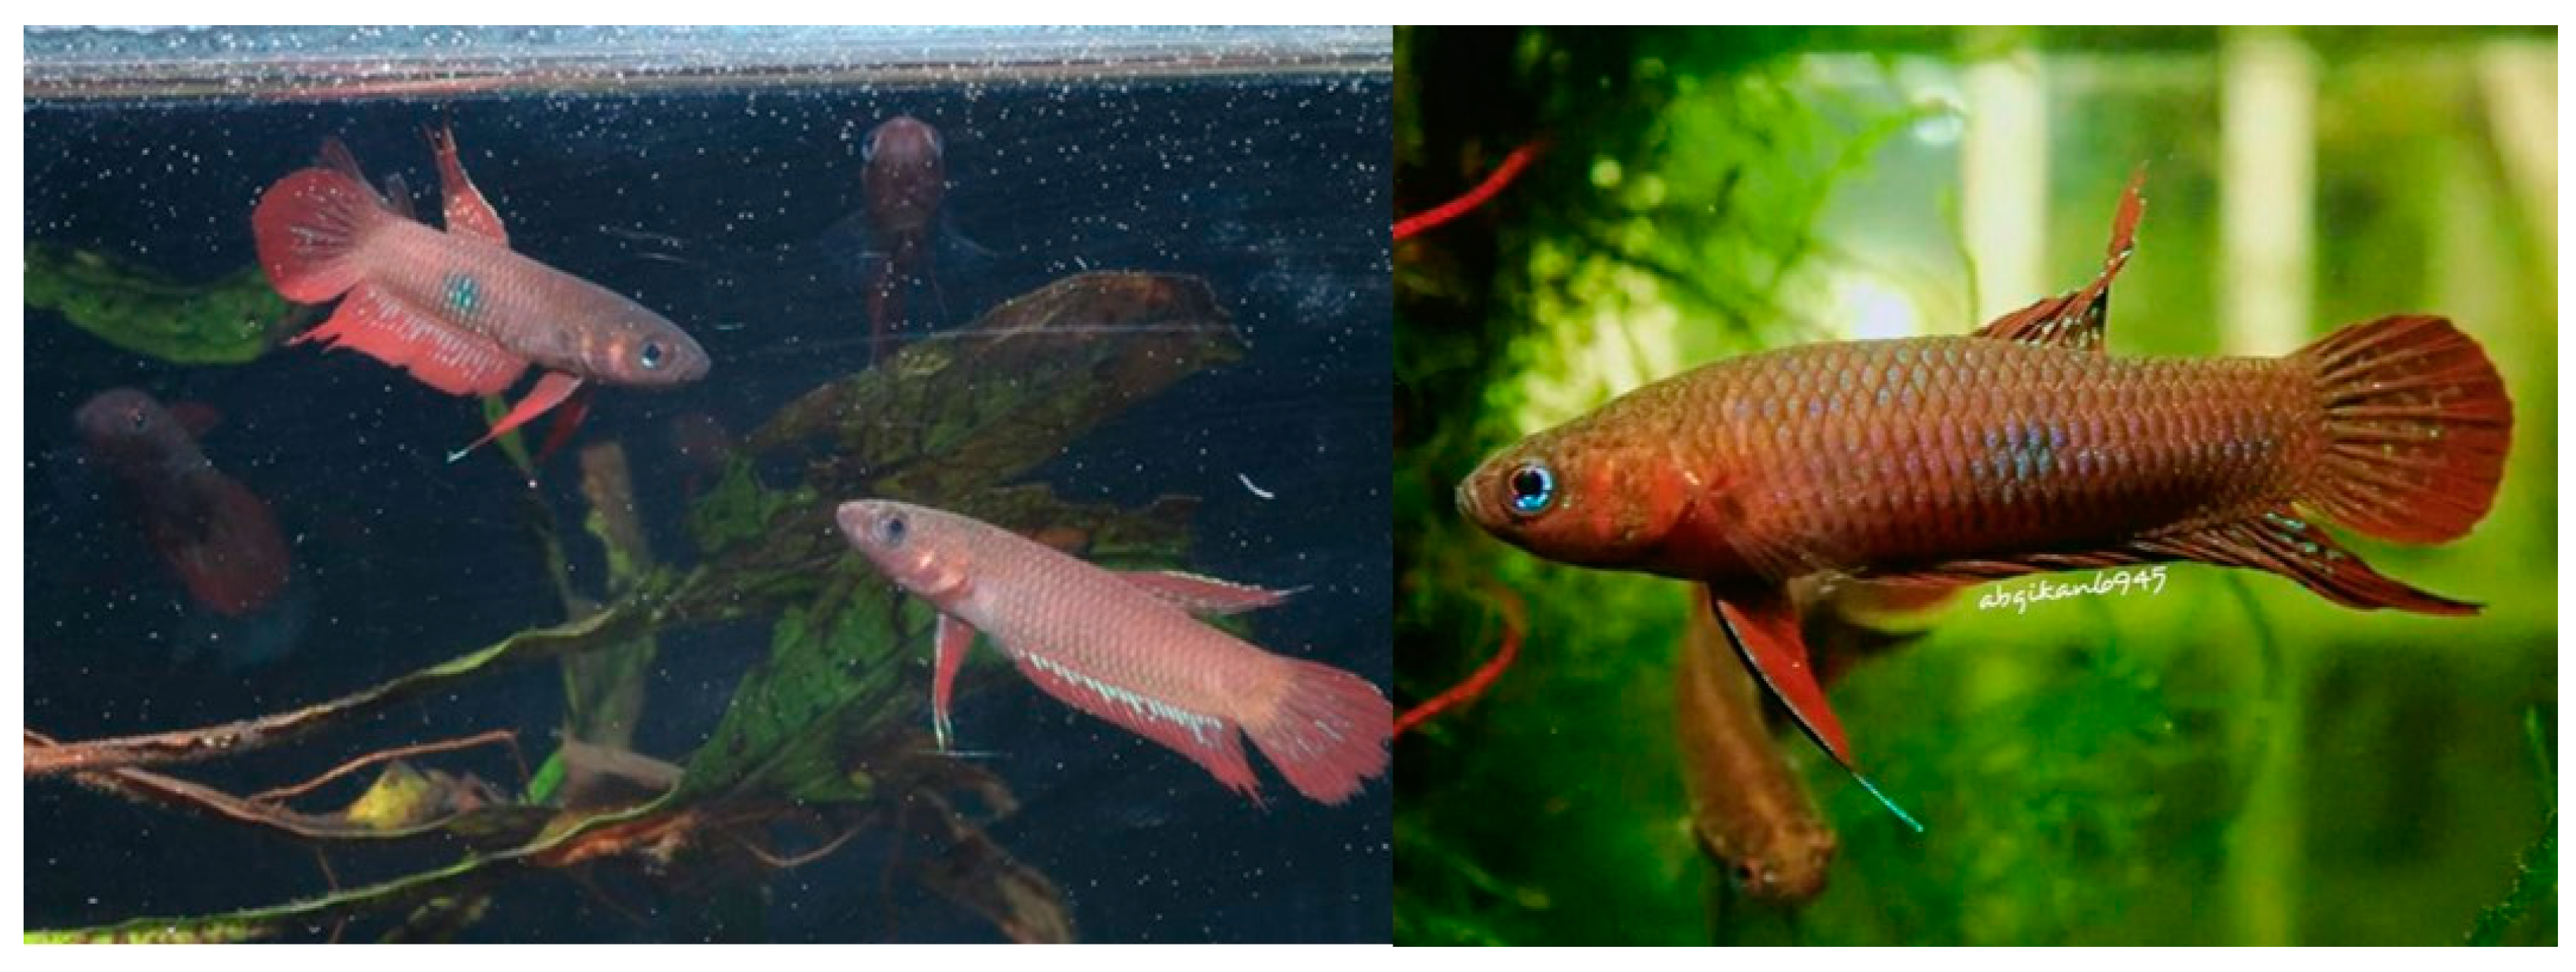 Sustainability Free Full-Text Fish Hobbyists Willingness to Donate for Wild Fighting Fish (Betta livida) Conservation in Klang Valley